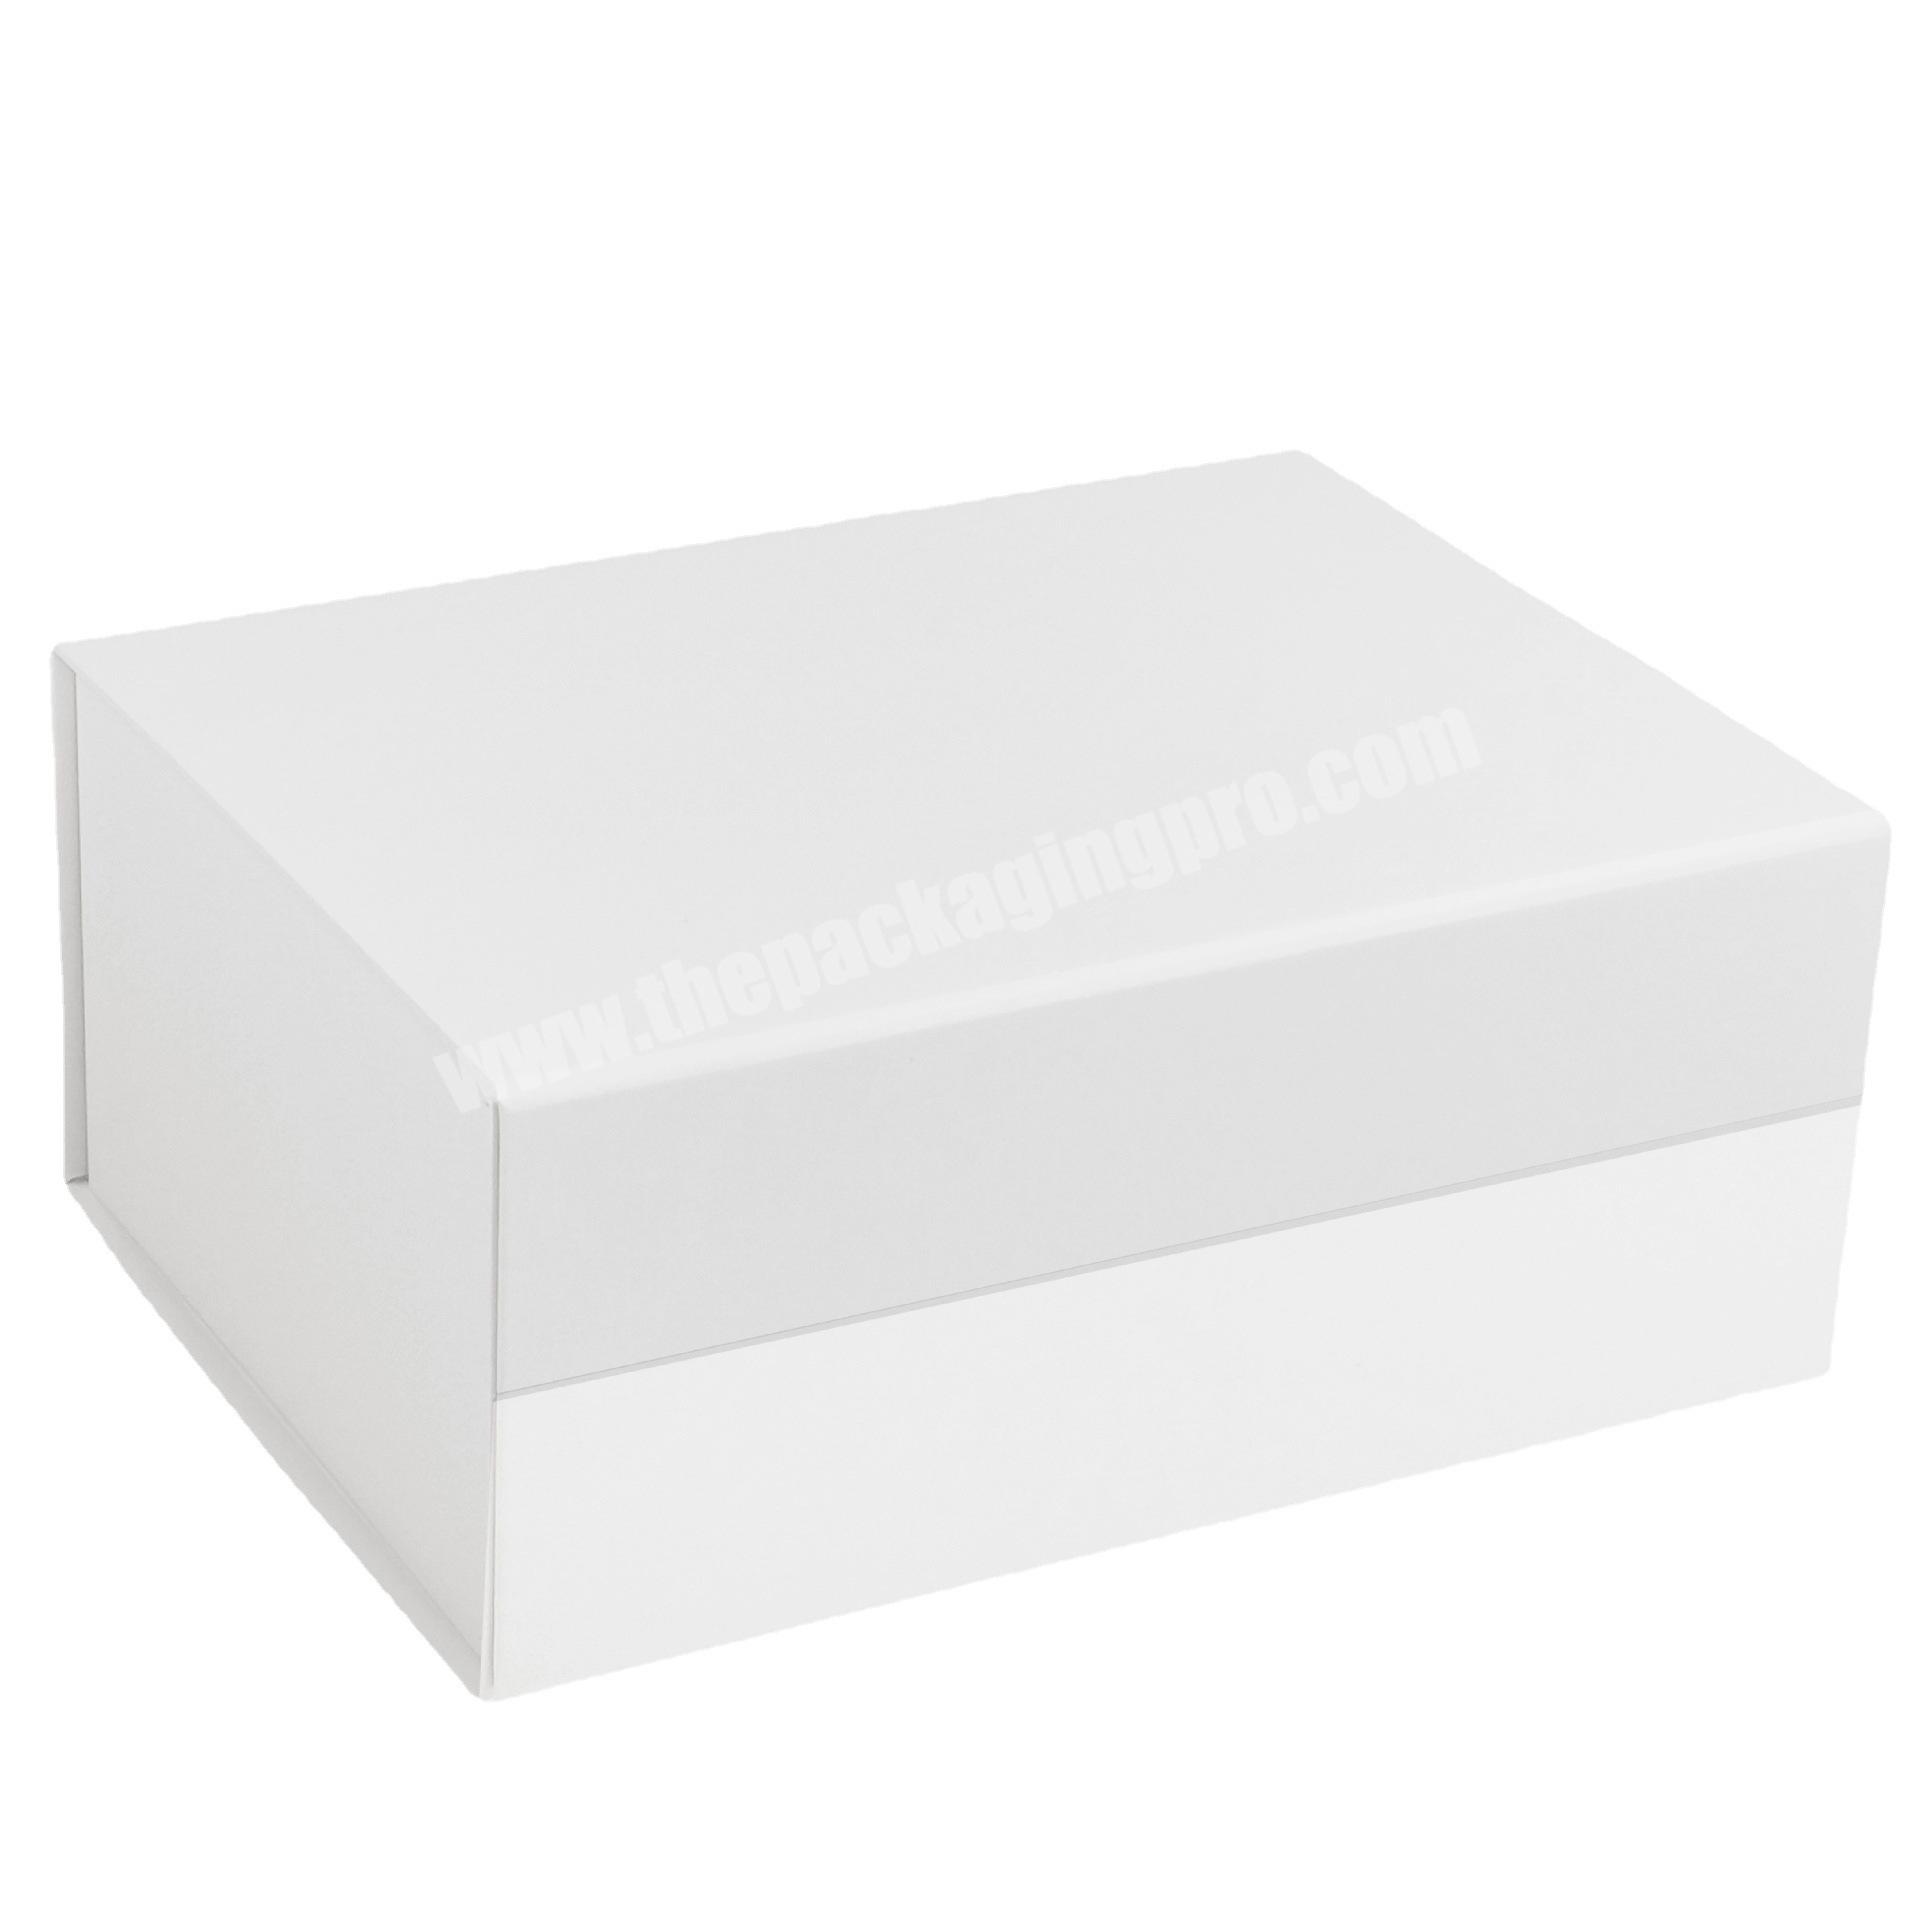 Wholesale Plain White Collapsible Magnetic Stock Product Gift Box for Small Business